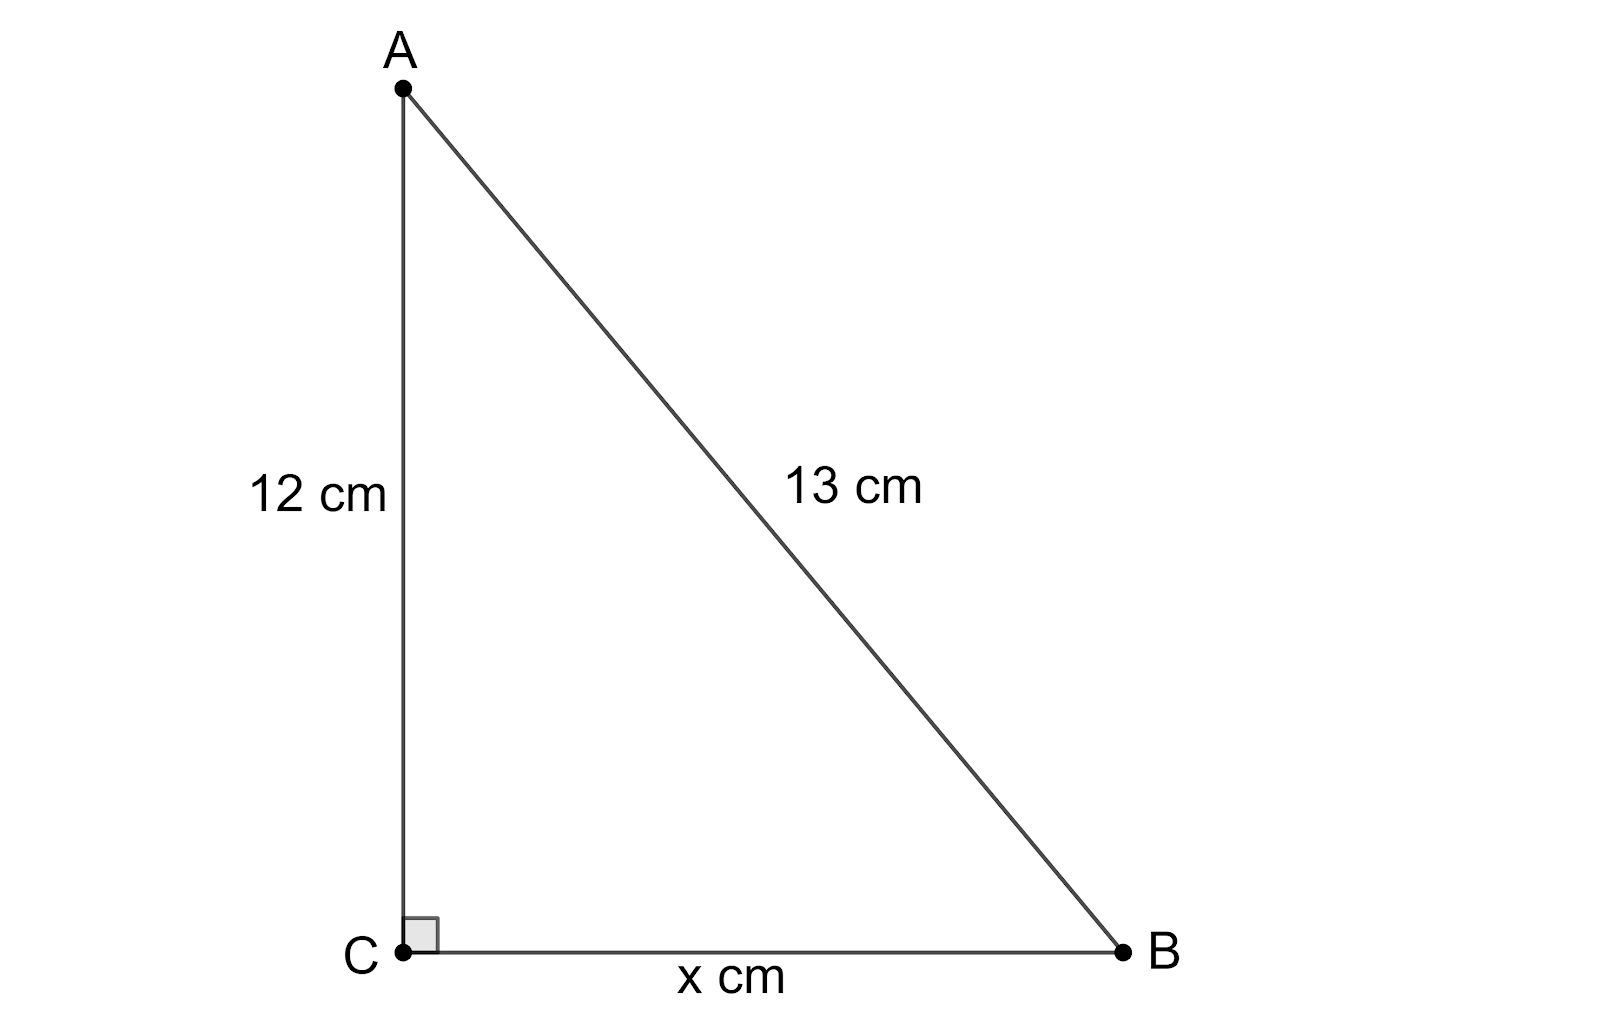 if-the-lengths-of-the-sides-of-a-right-angle-triangle-are-given-as-12